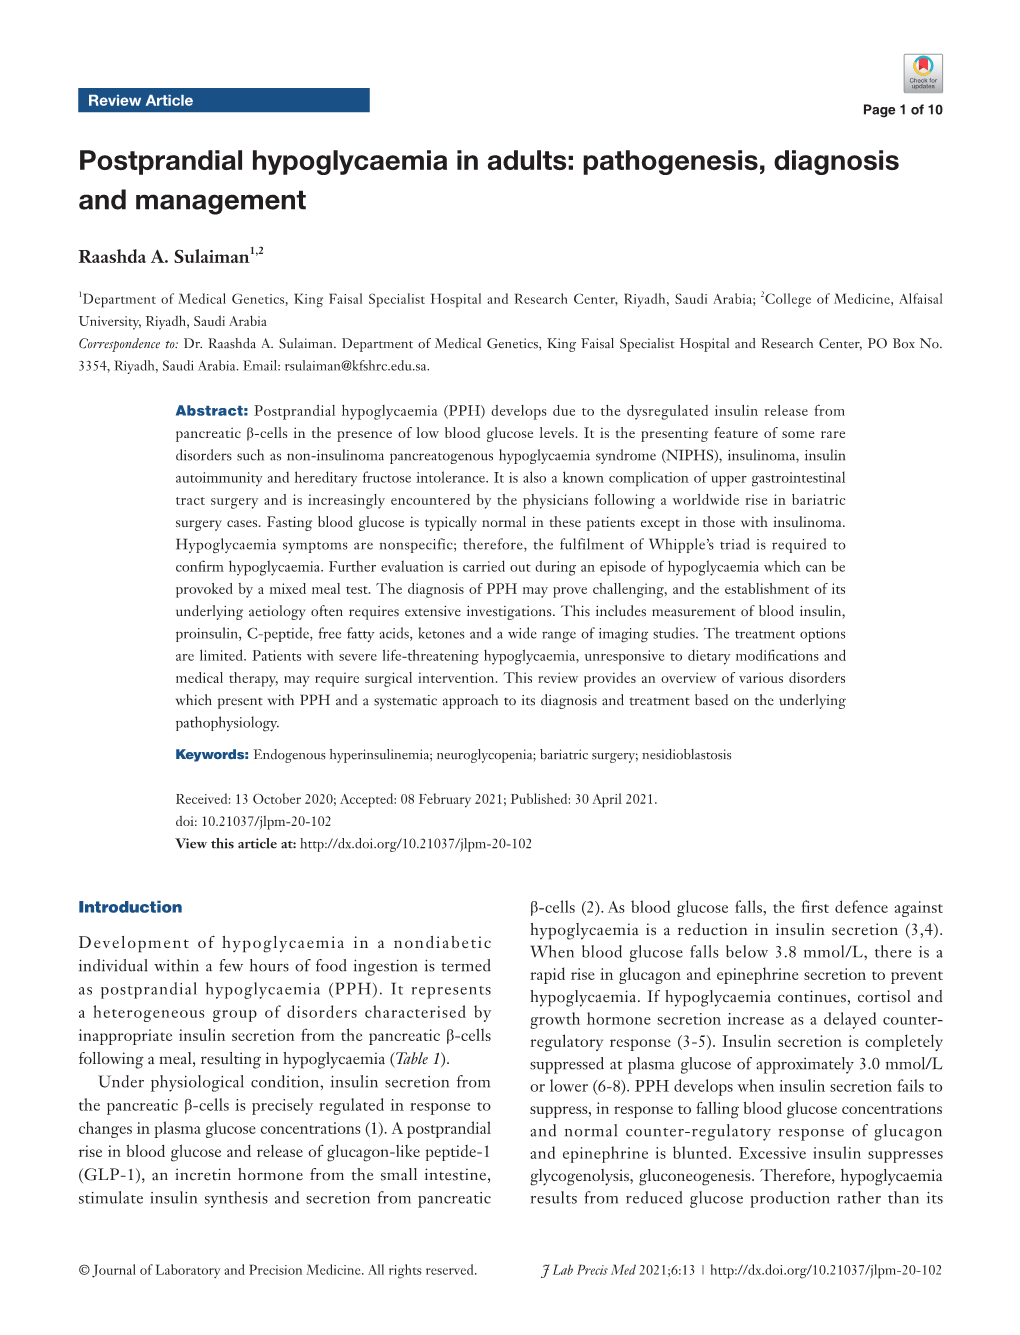 Postprandial Hypoglycaemia in Adults: Pathogenesis, Diagnosis and Management